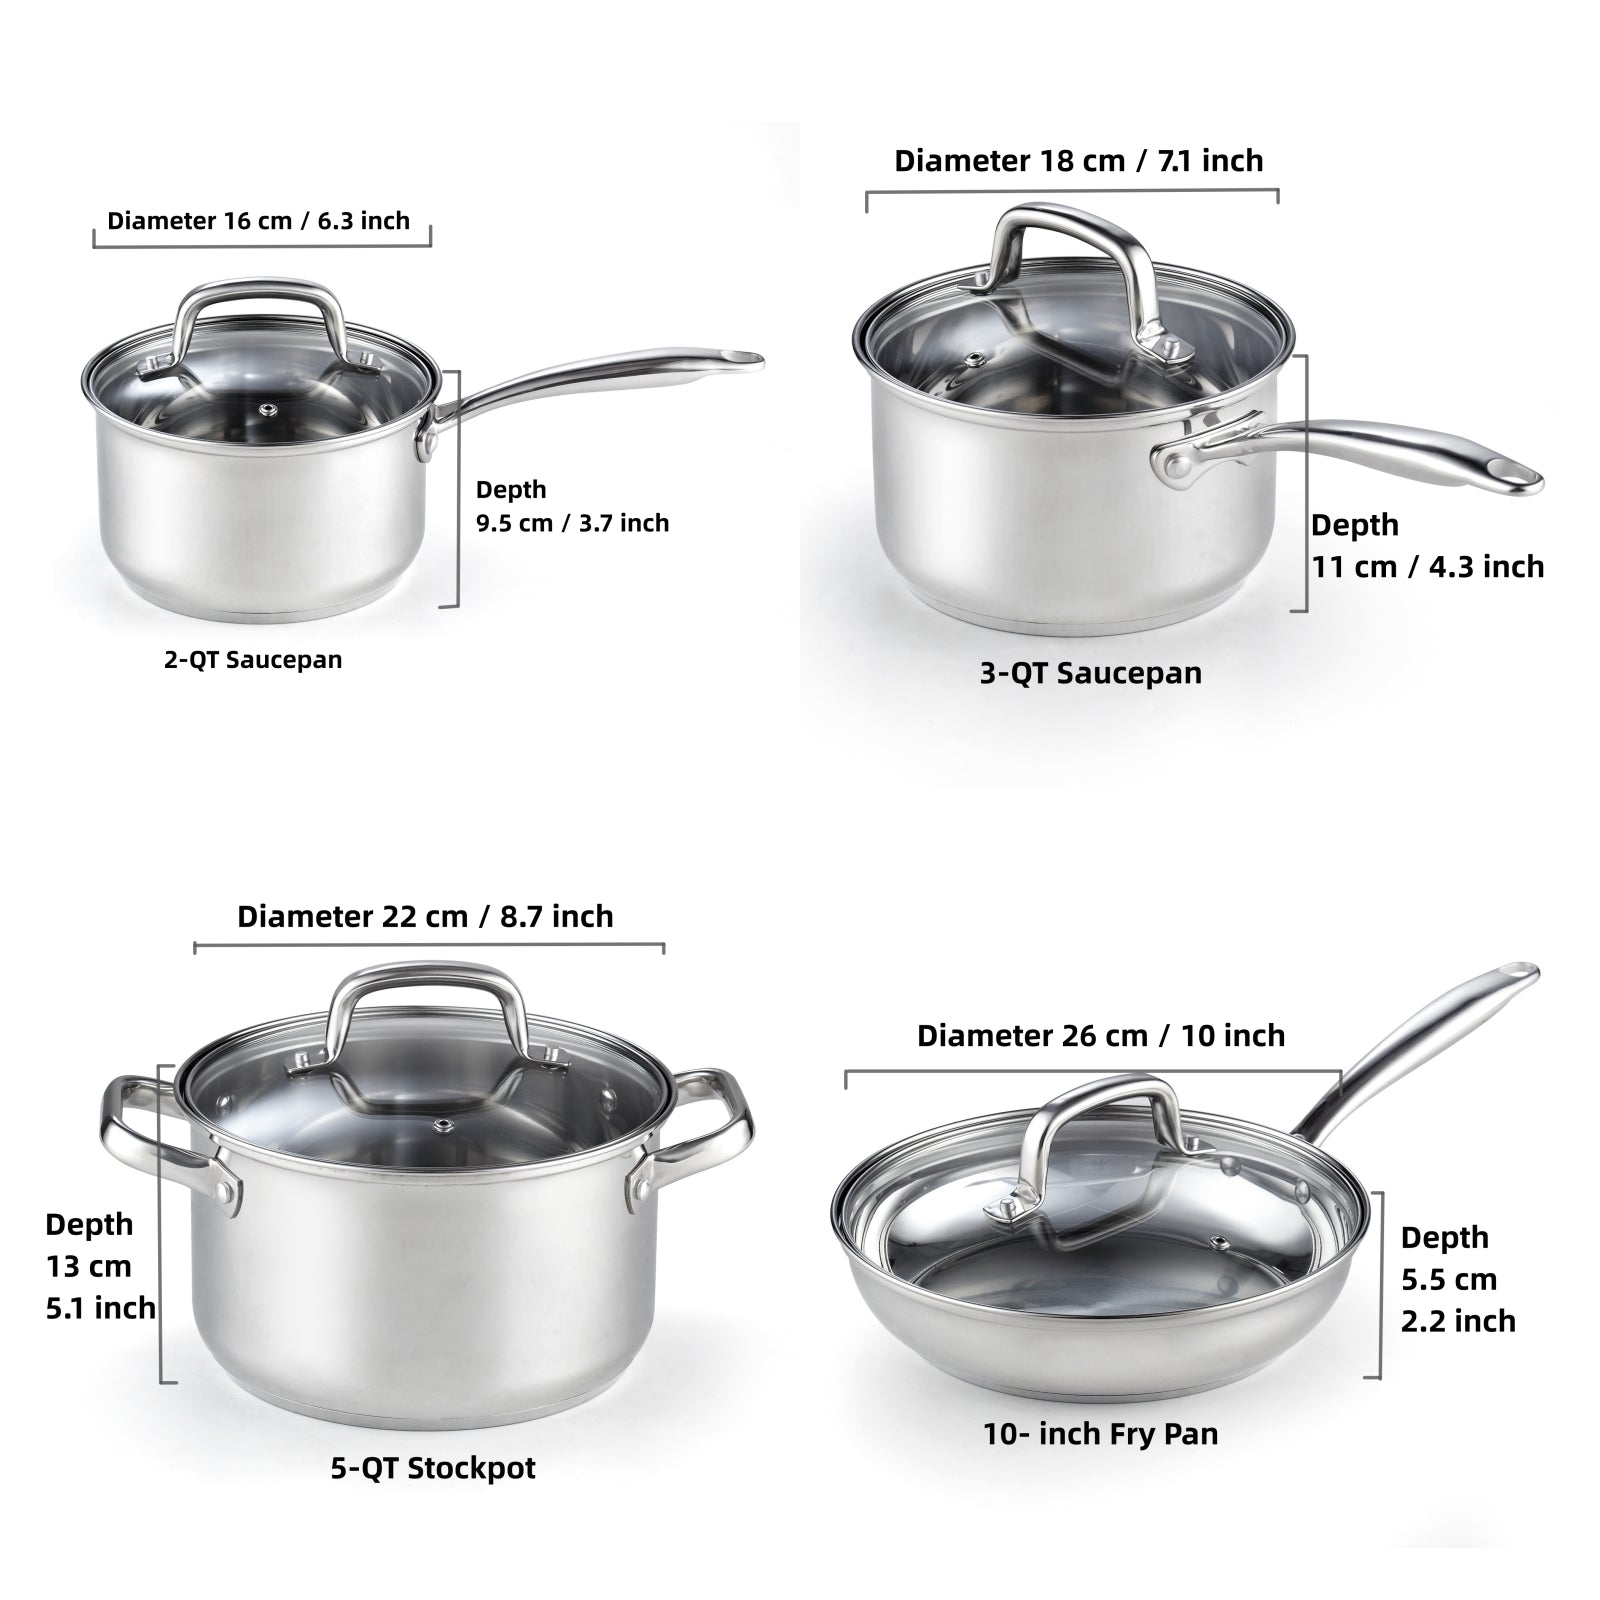 Cook N Home Pots and Pans Stainless Steel Cooking Set 7-Piece, Tri-Ply Clad  Kitchen Cookware Set, Dishwasher Safe, Glass Lid, Silver